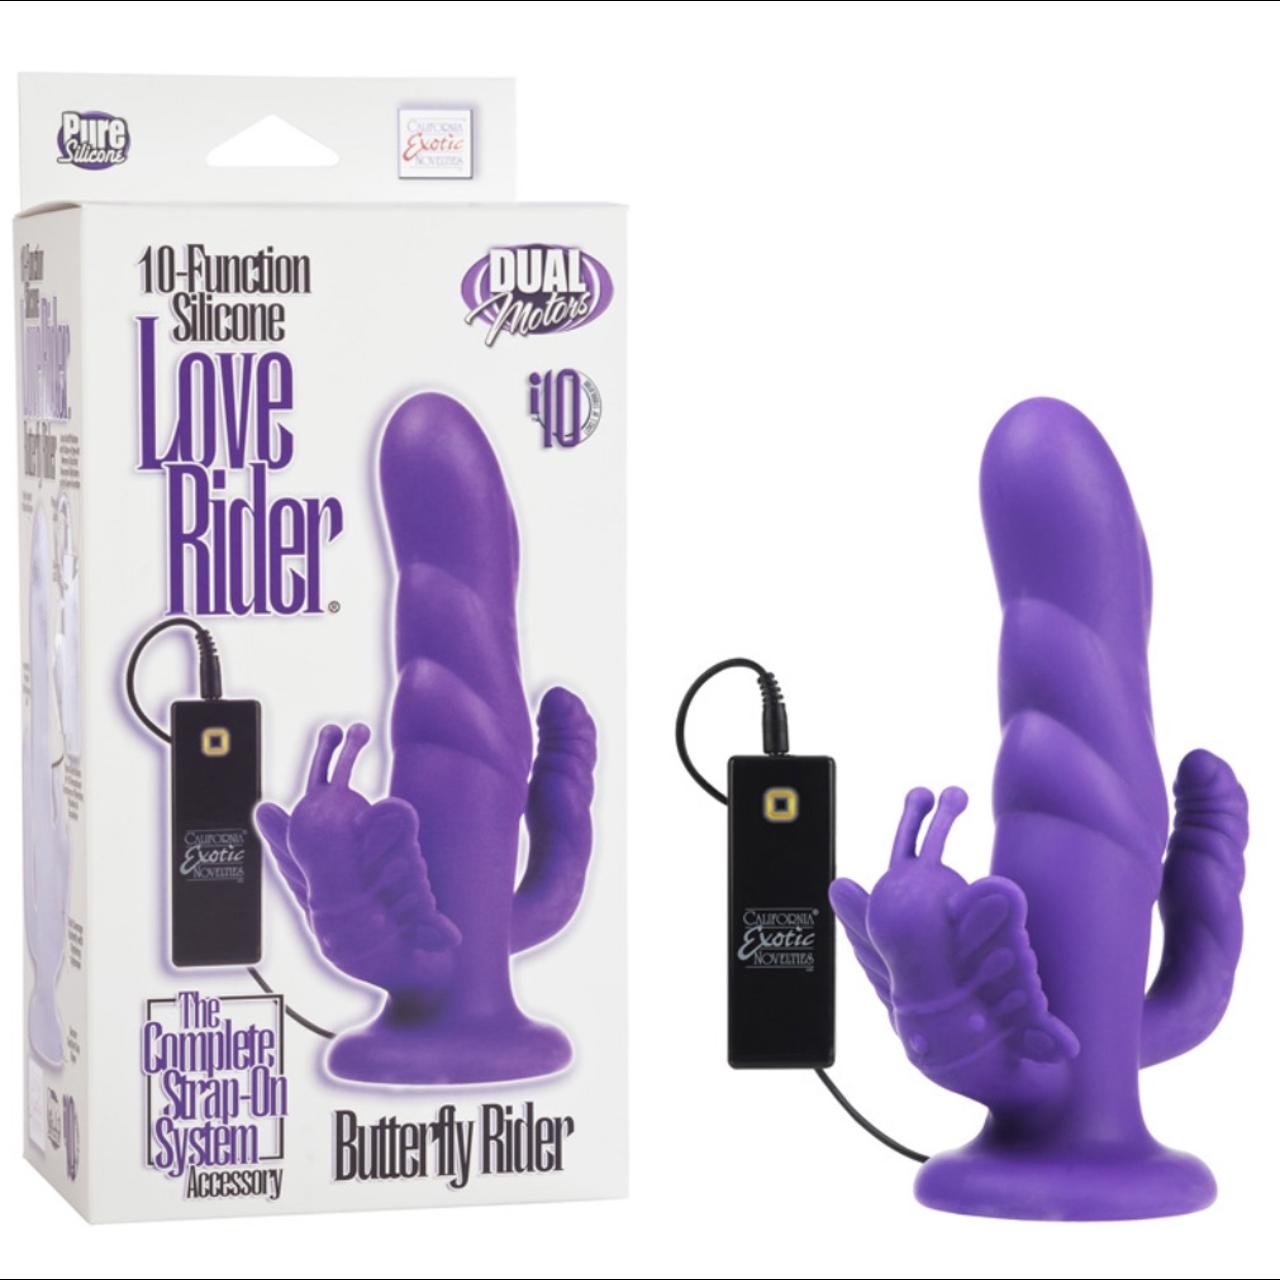 California Exotic Novelties Rechargeable Silicone Love Rider